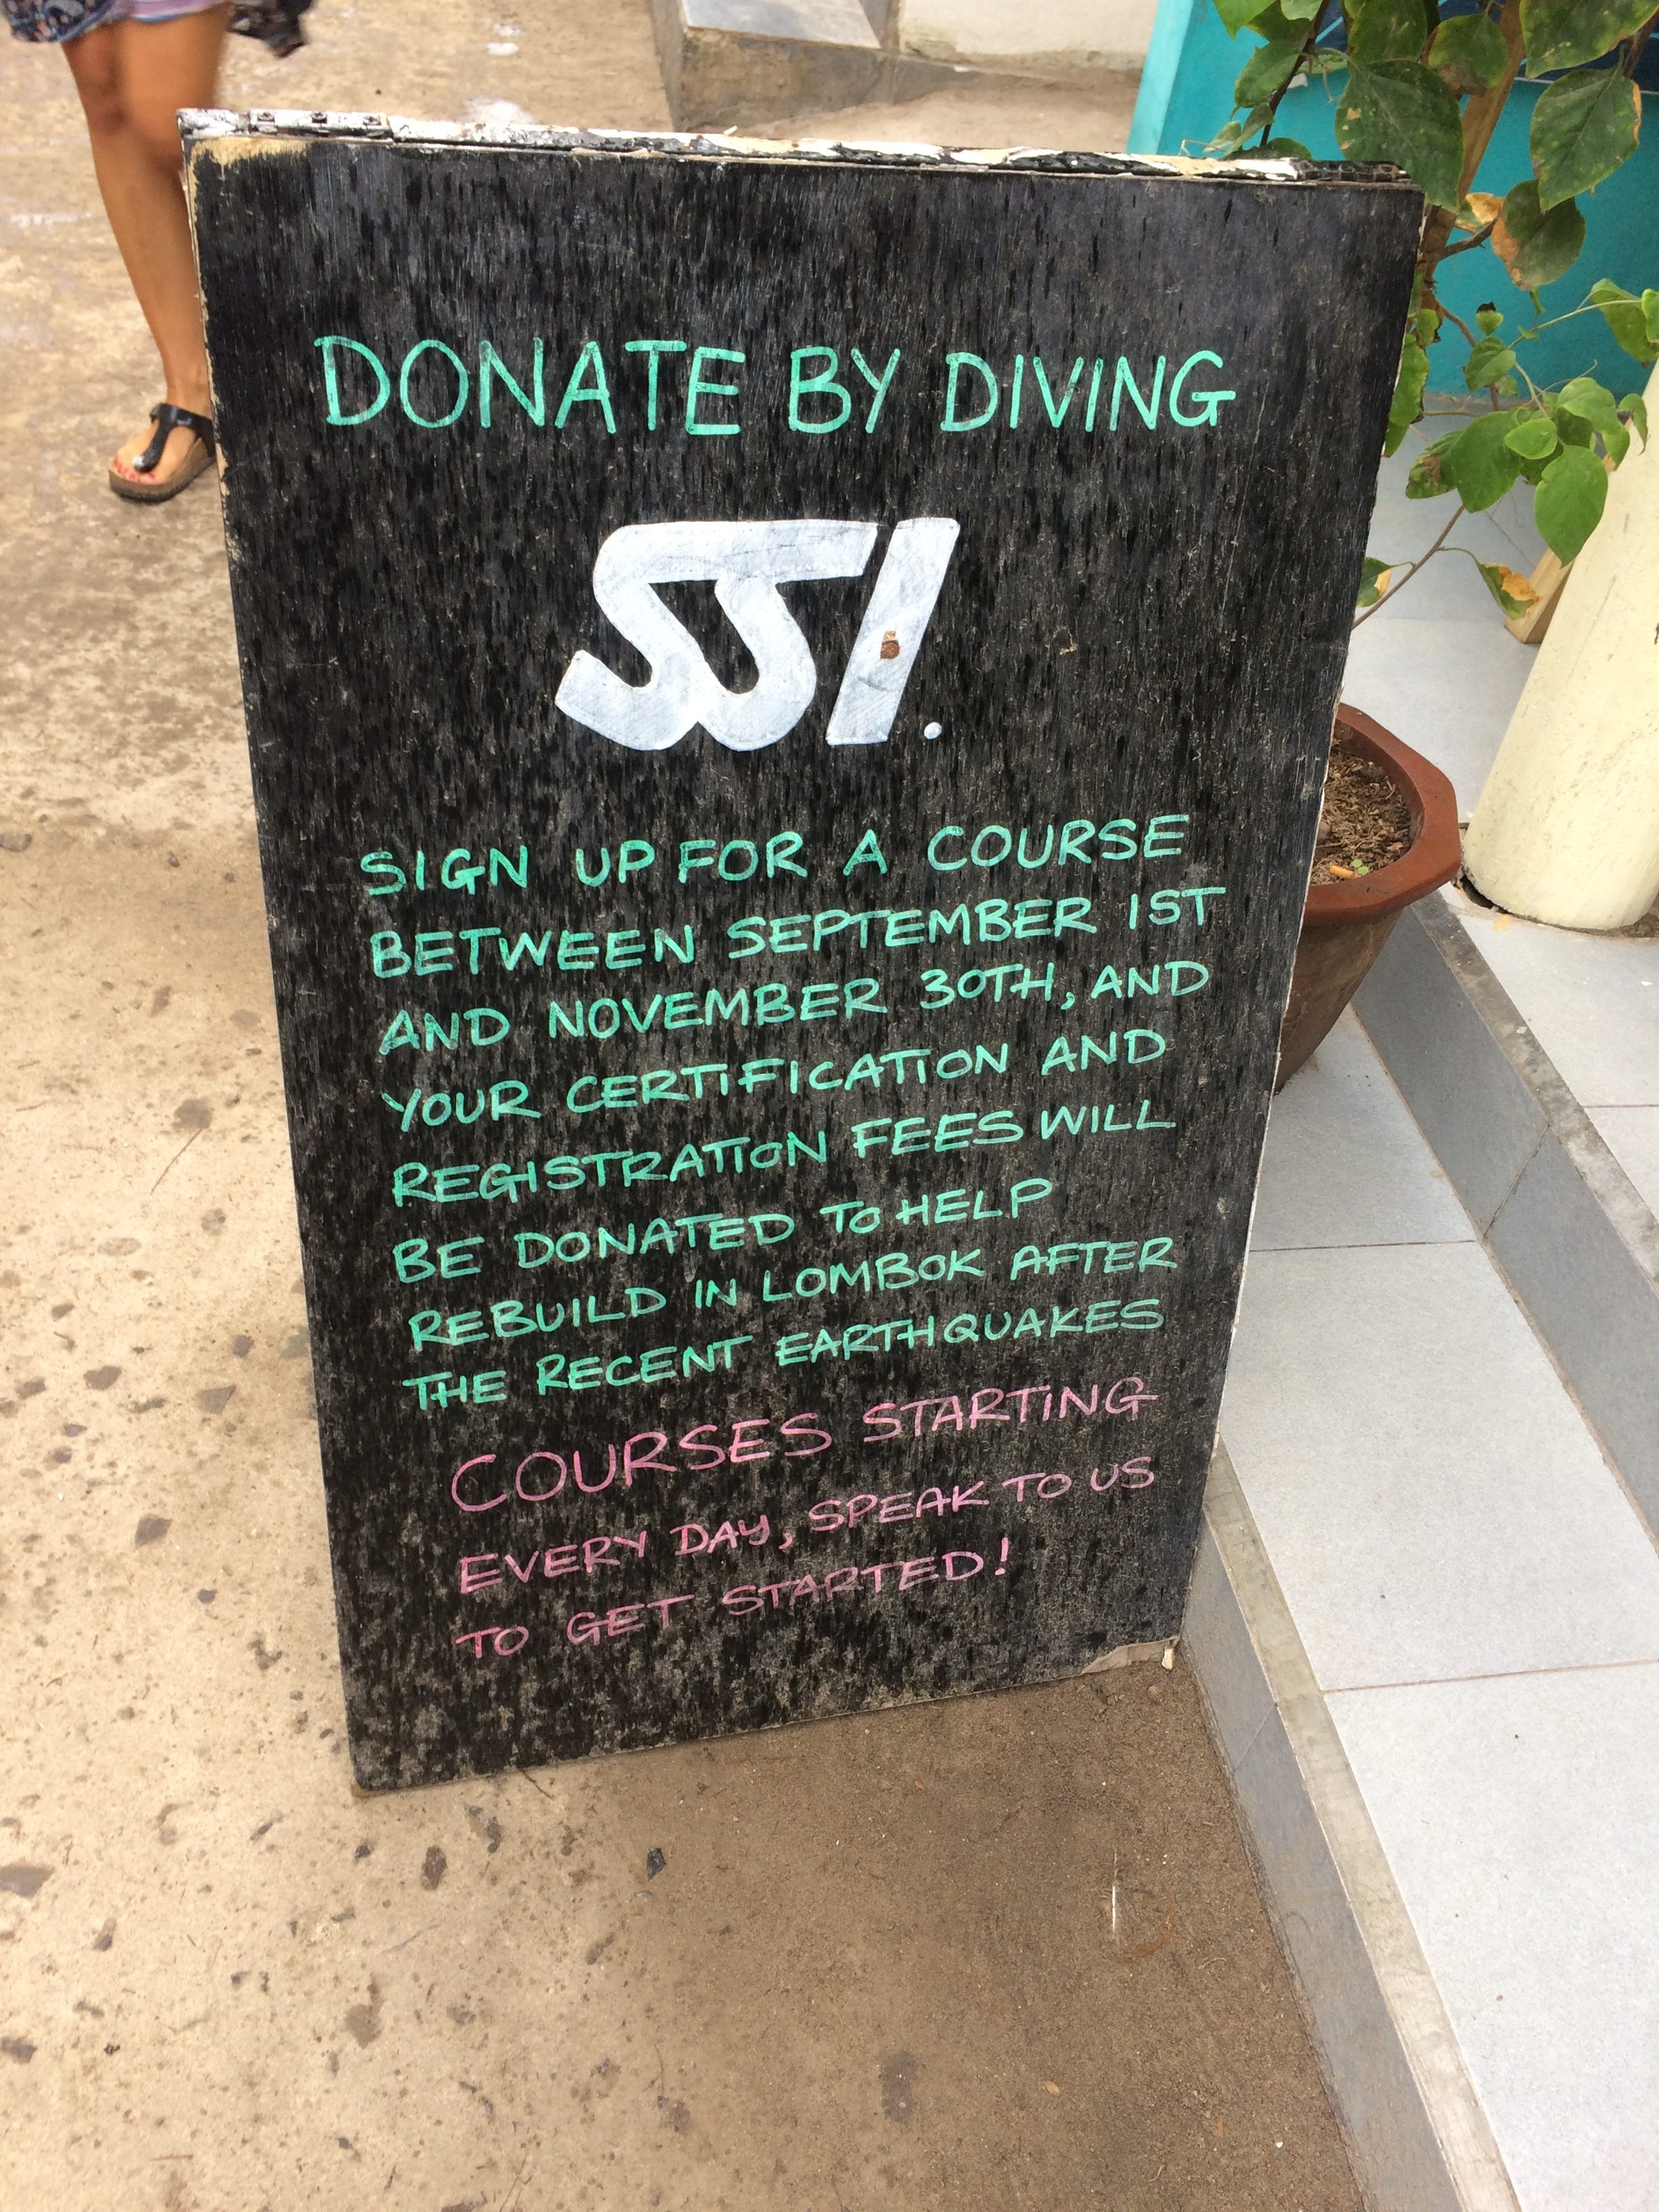 Donate by diving SSI (c) Registration Fees will be donated to help rebuild in Lombok